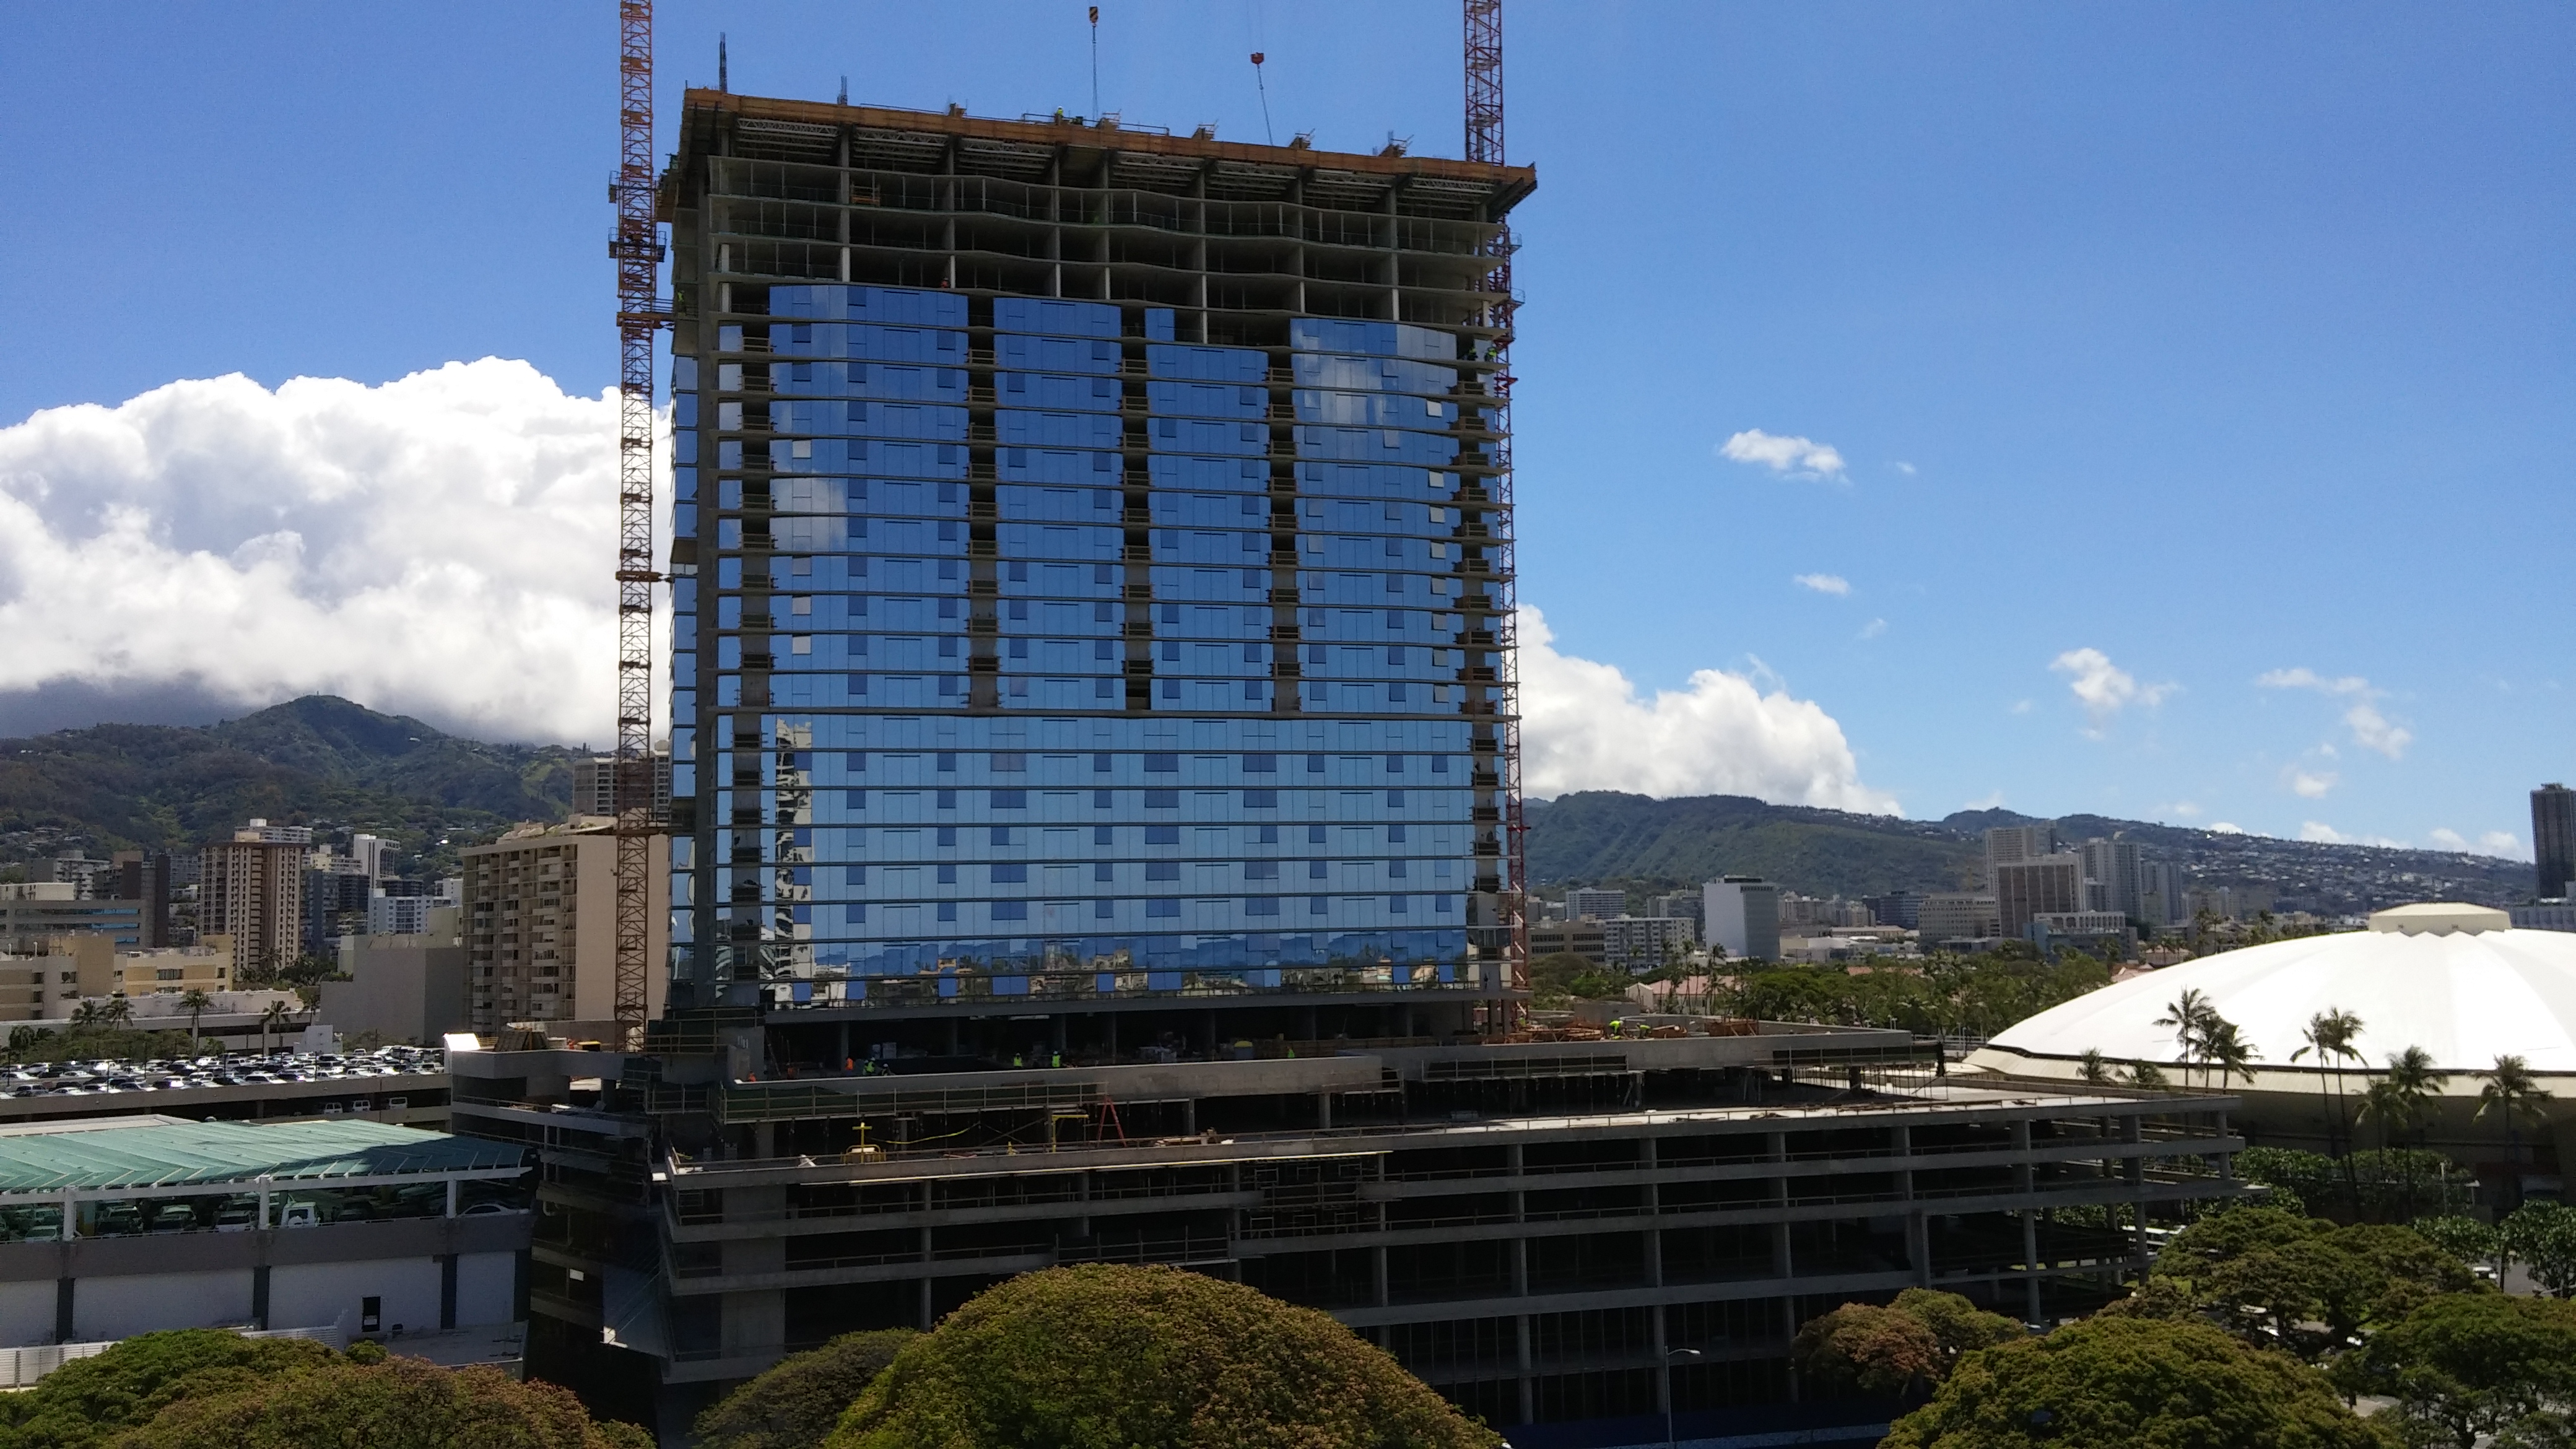 Hawaii agency delays decision on high-rise ‘glass rule’ for OliverMcMillan’s Symphony Honolulu condo tower